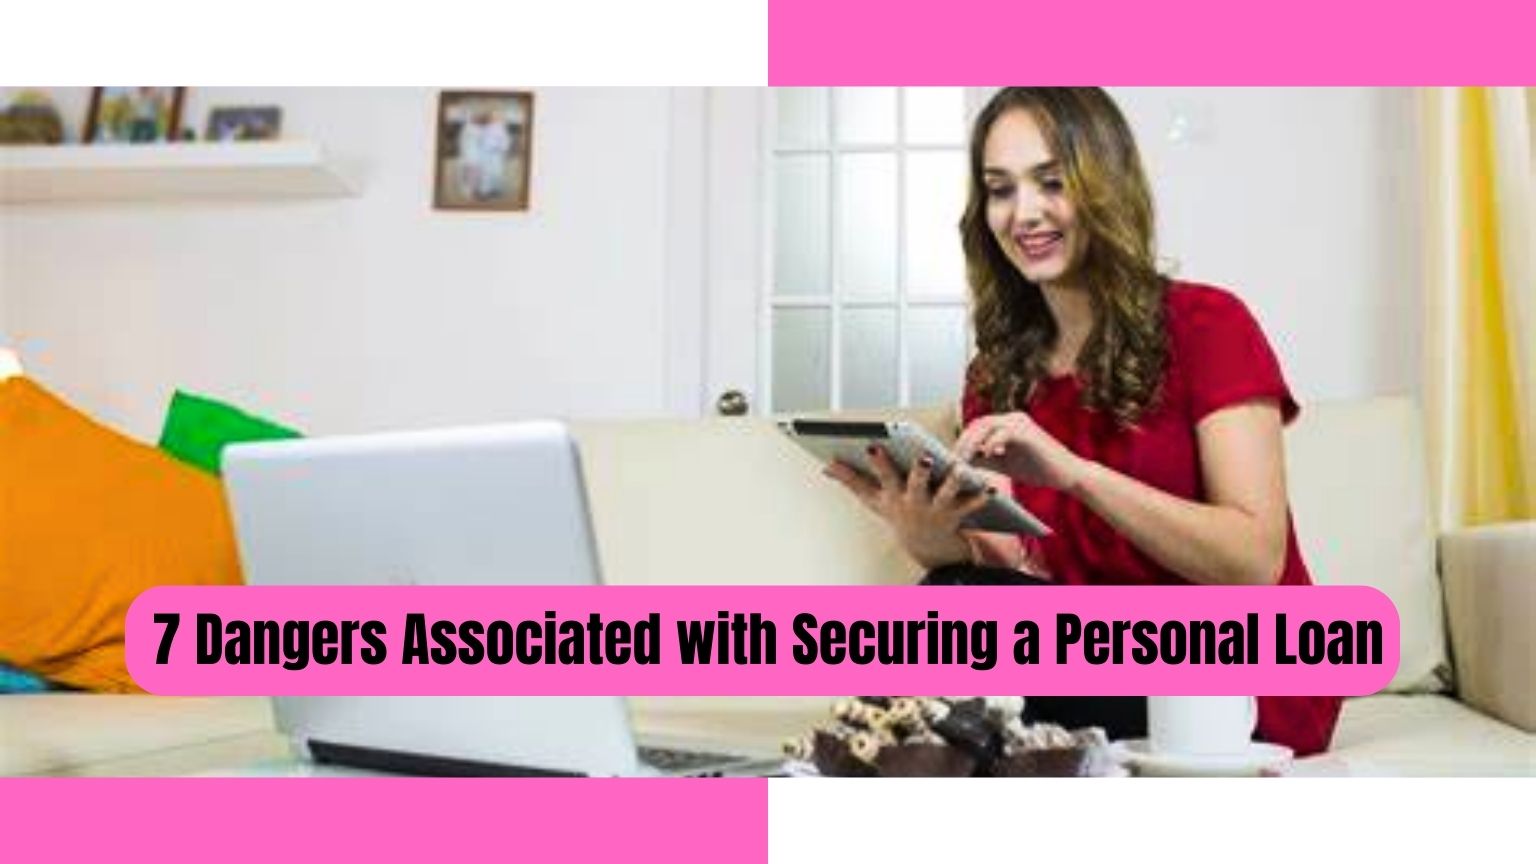 7 Dangers Associated with Securing a Personal Loan